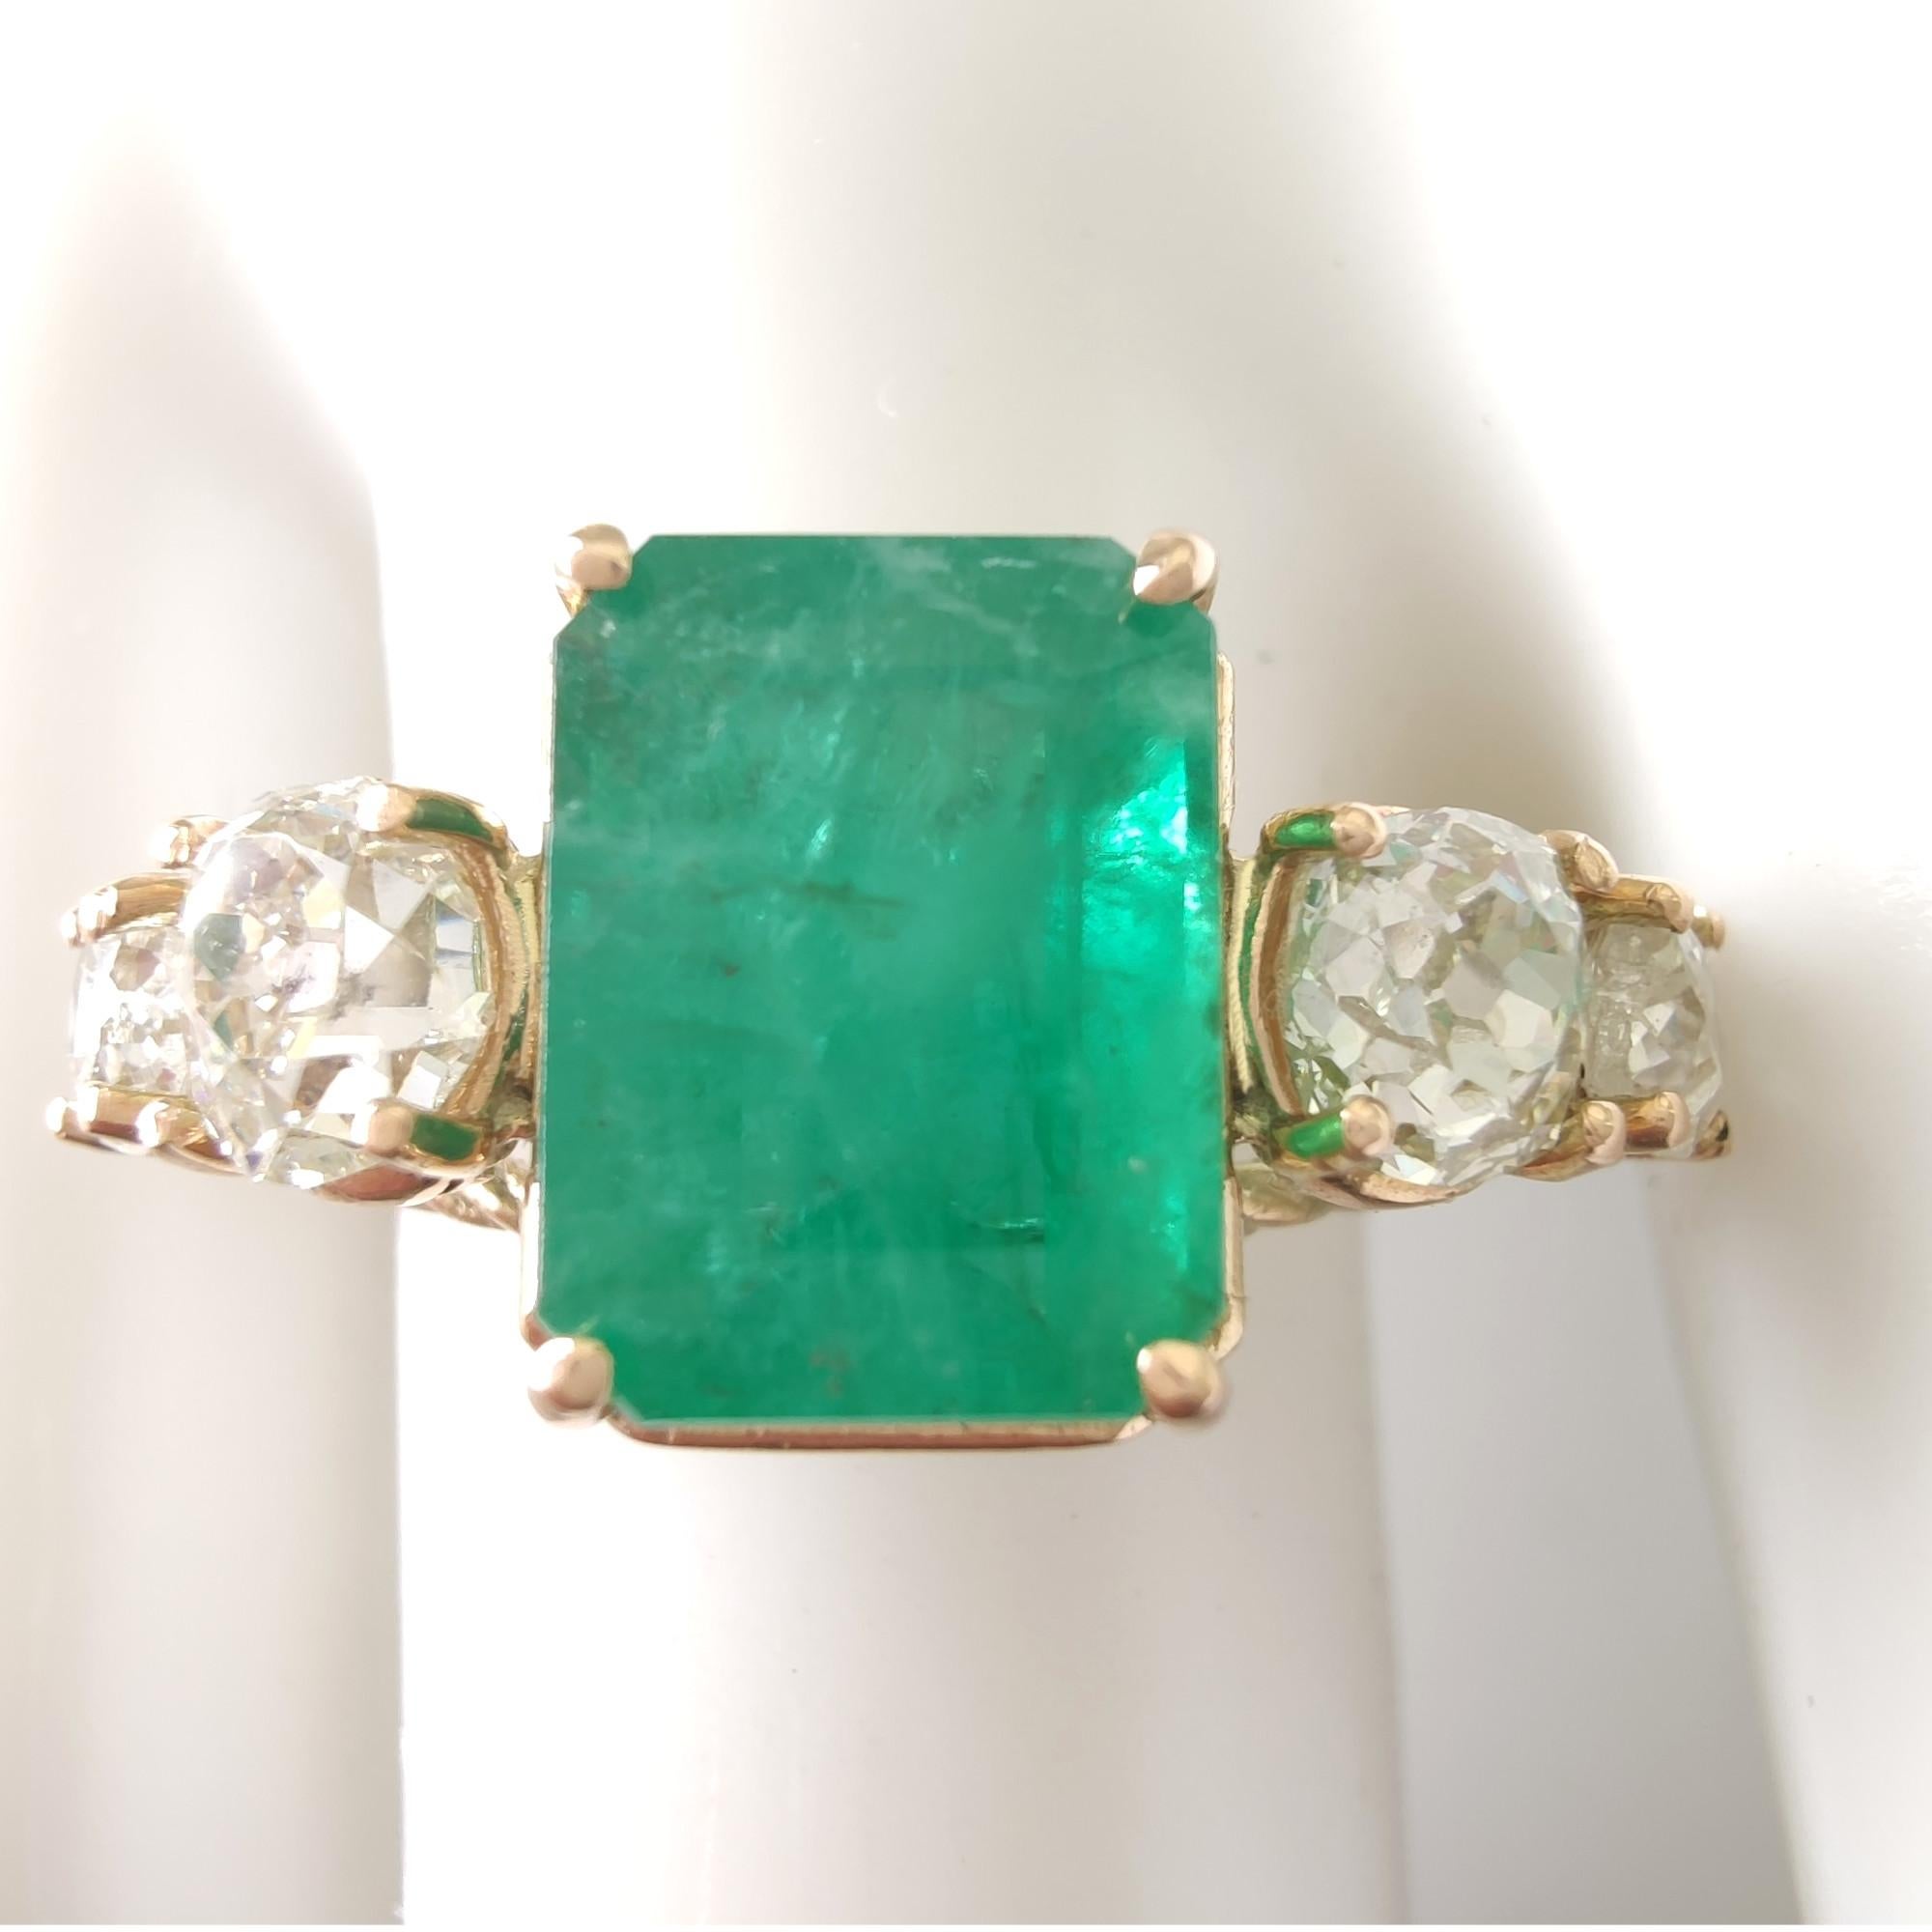  Gemstone 14k Gold Ring Genuine Emerald Ring Diamond Coctail Ring Certified  Pour femmes 